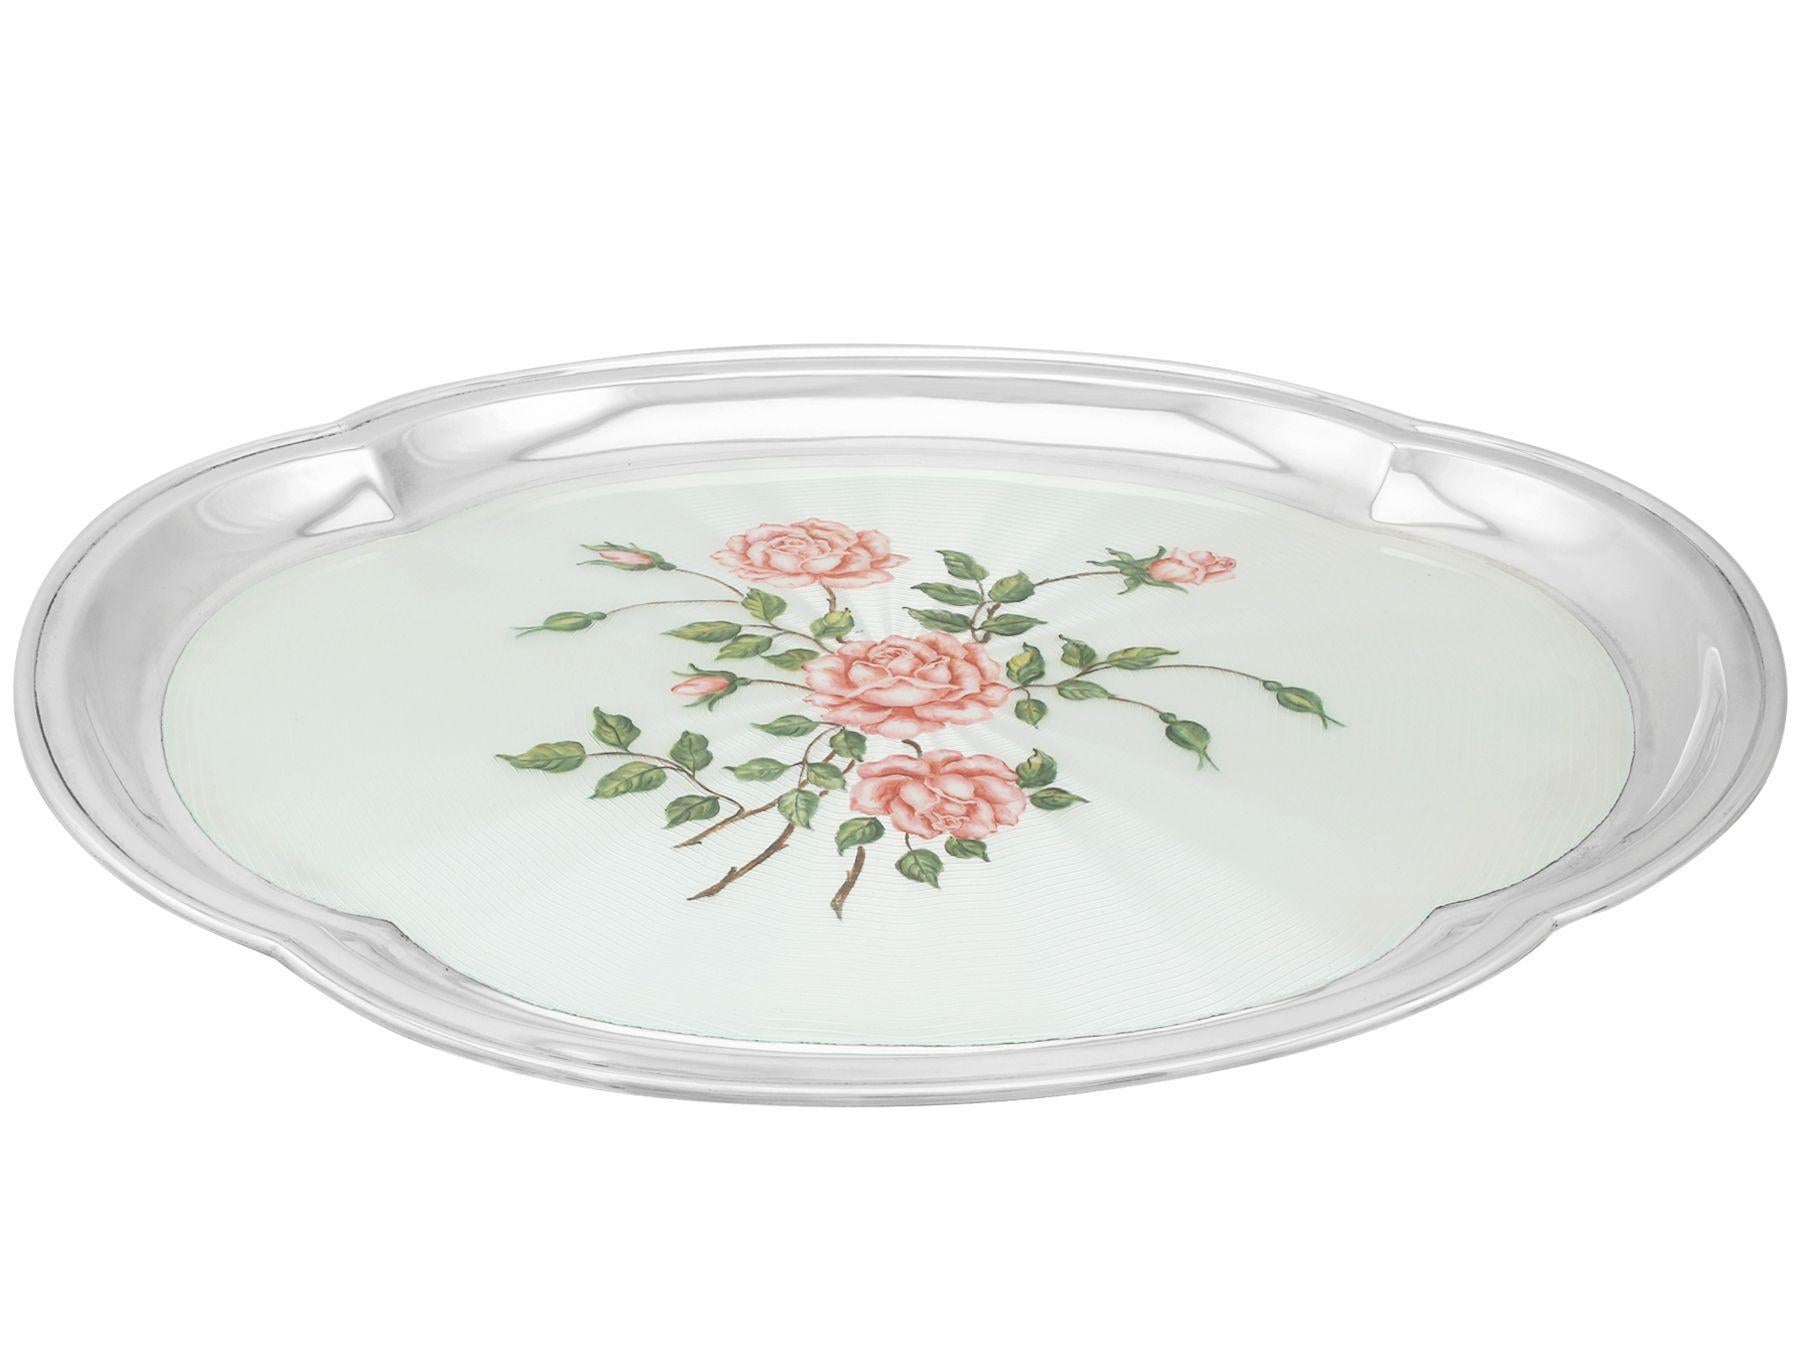 An exceptional, fine and impressive vintage Elizabeth II English sterling silver and enamel dressing table tray; an addition to our diverse ornamental silverware collection.

This exceptional antique sterling silver dressing table tray has a plain